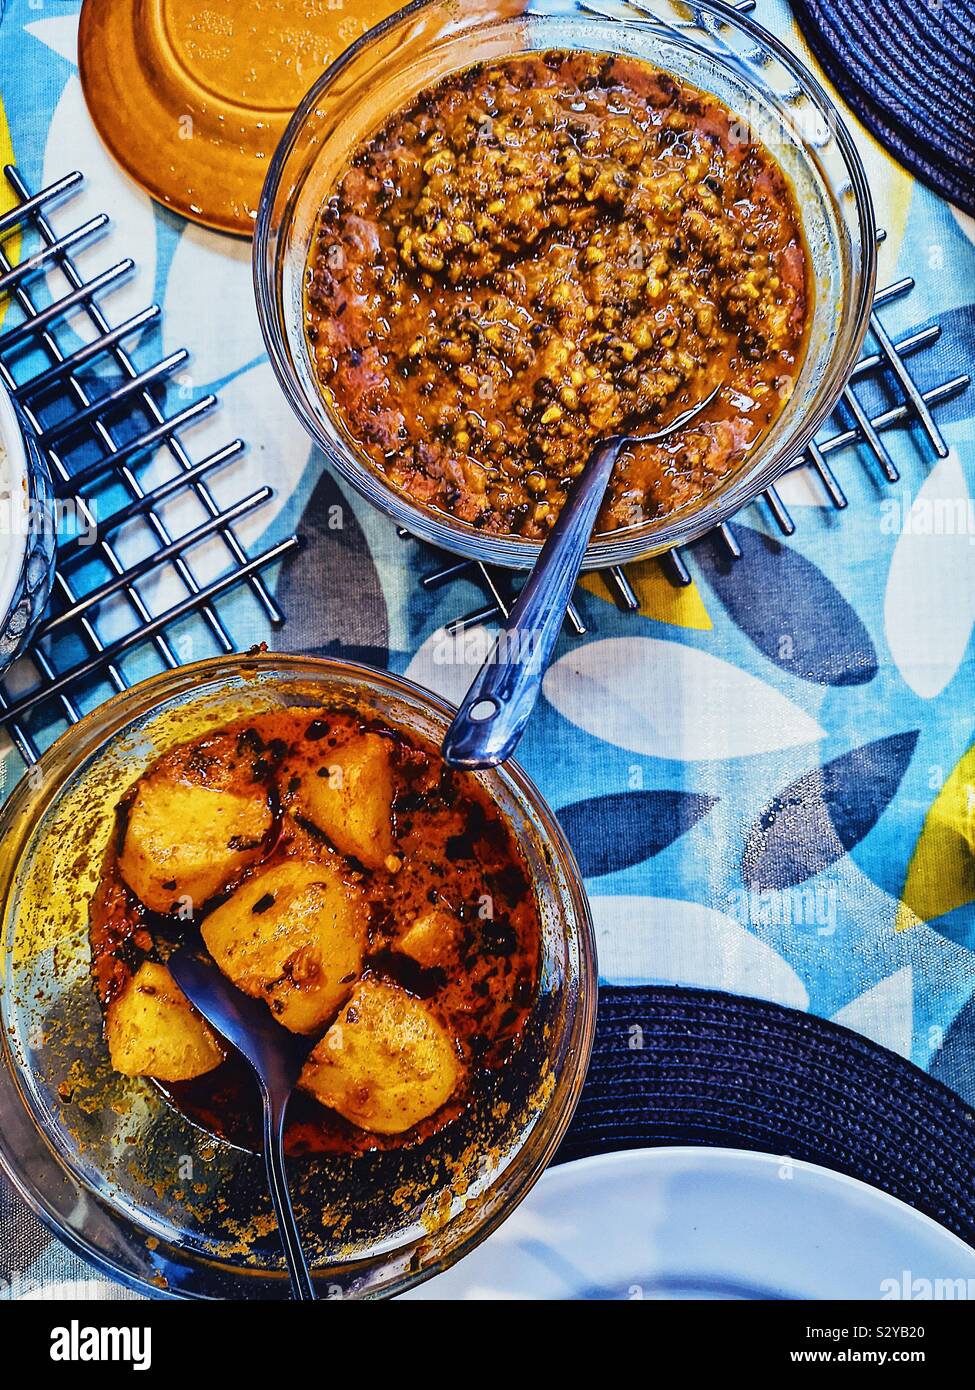 Elevated view of homemade Indian meal with mung dal and potato curry Stock Photo